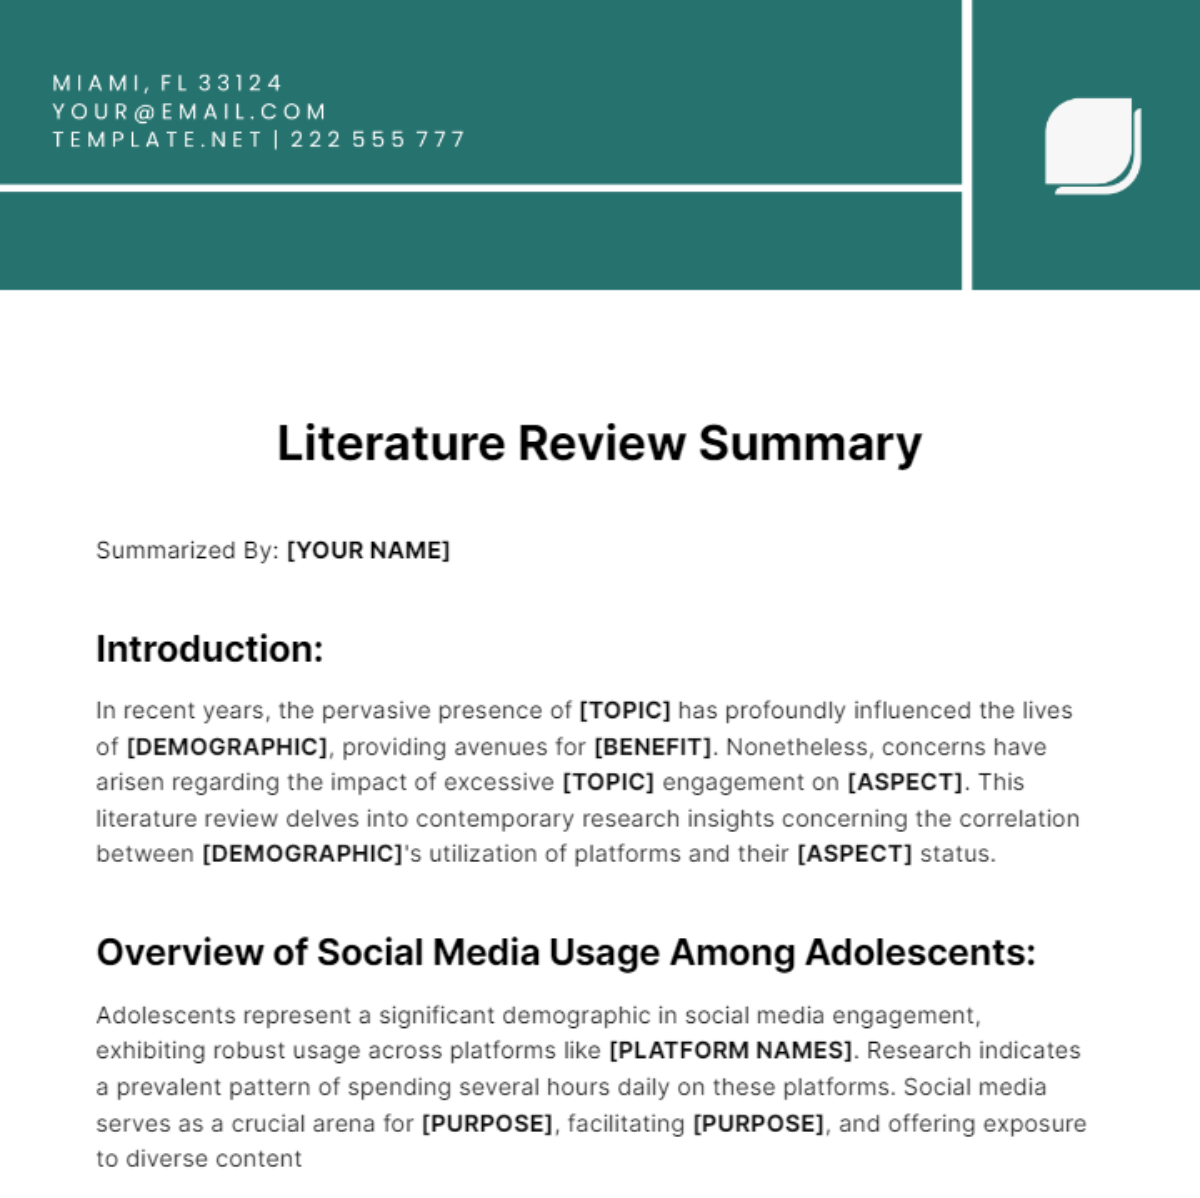 Literature Review Summary Template